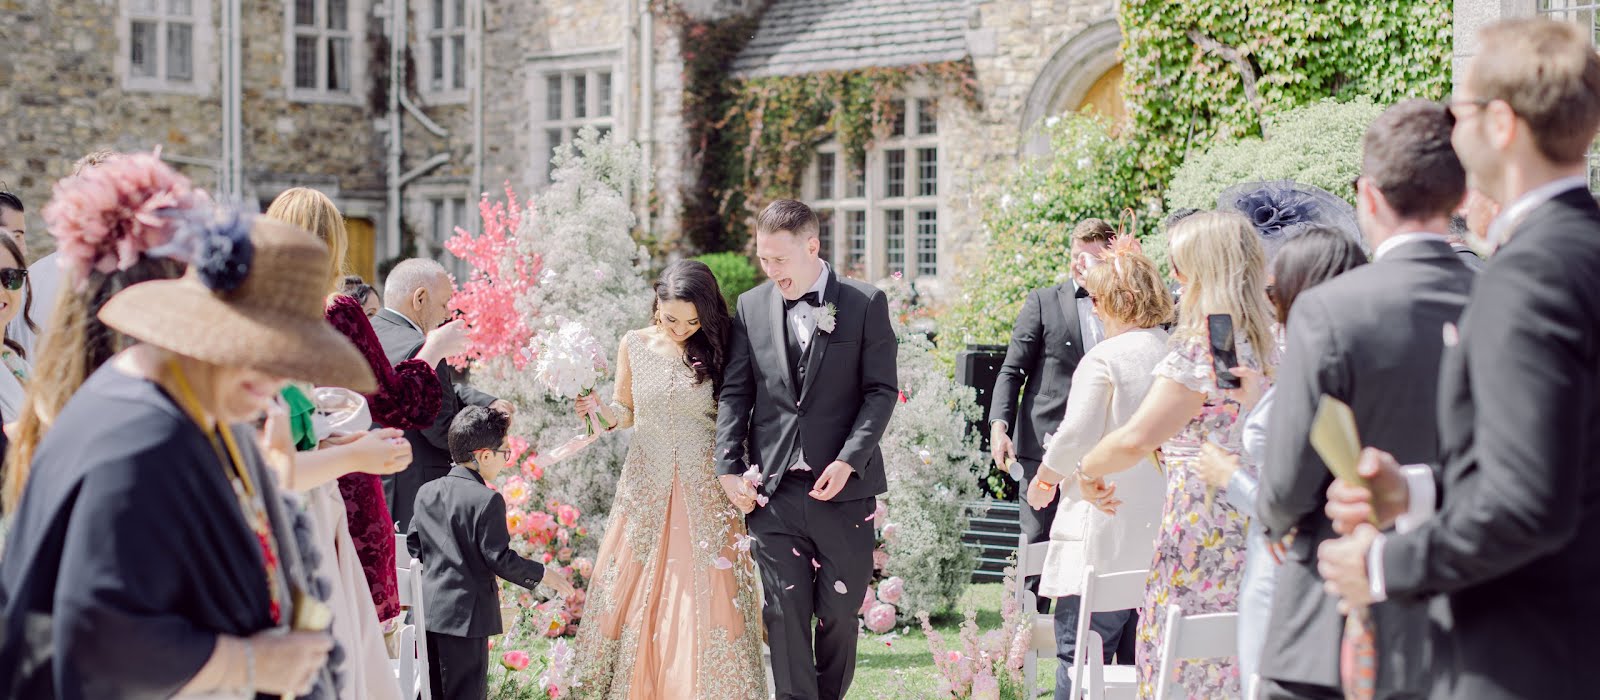 Real Weddings: This Pakistani Irish wedding is a beautiful blend of traditions